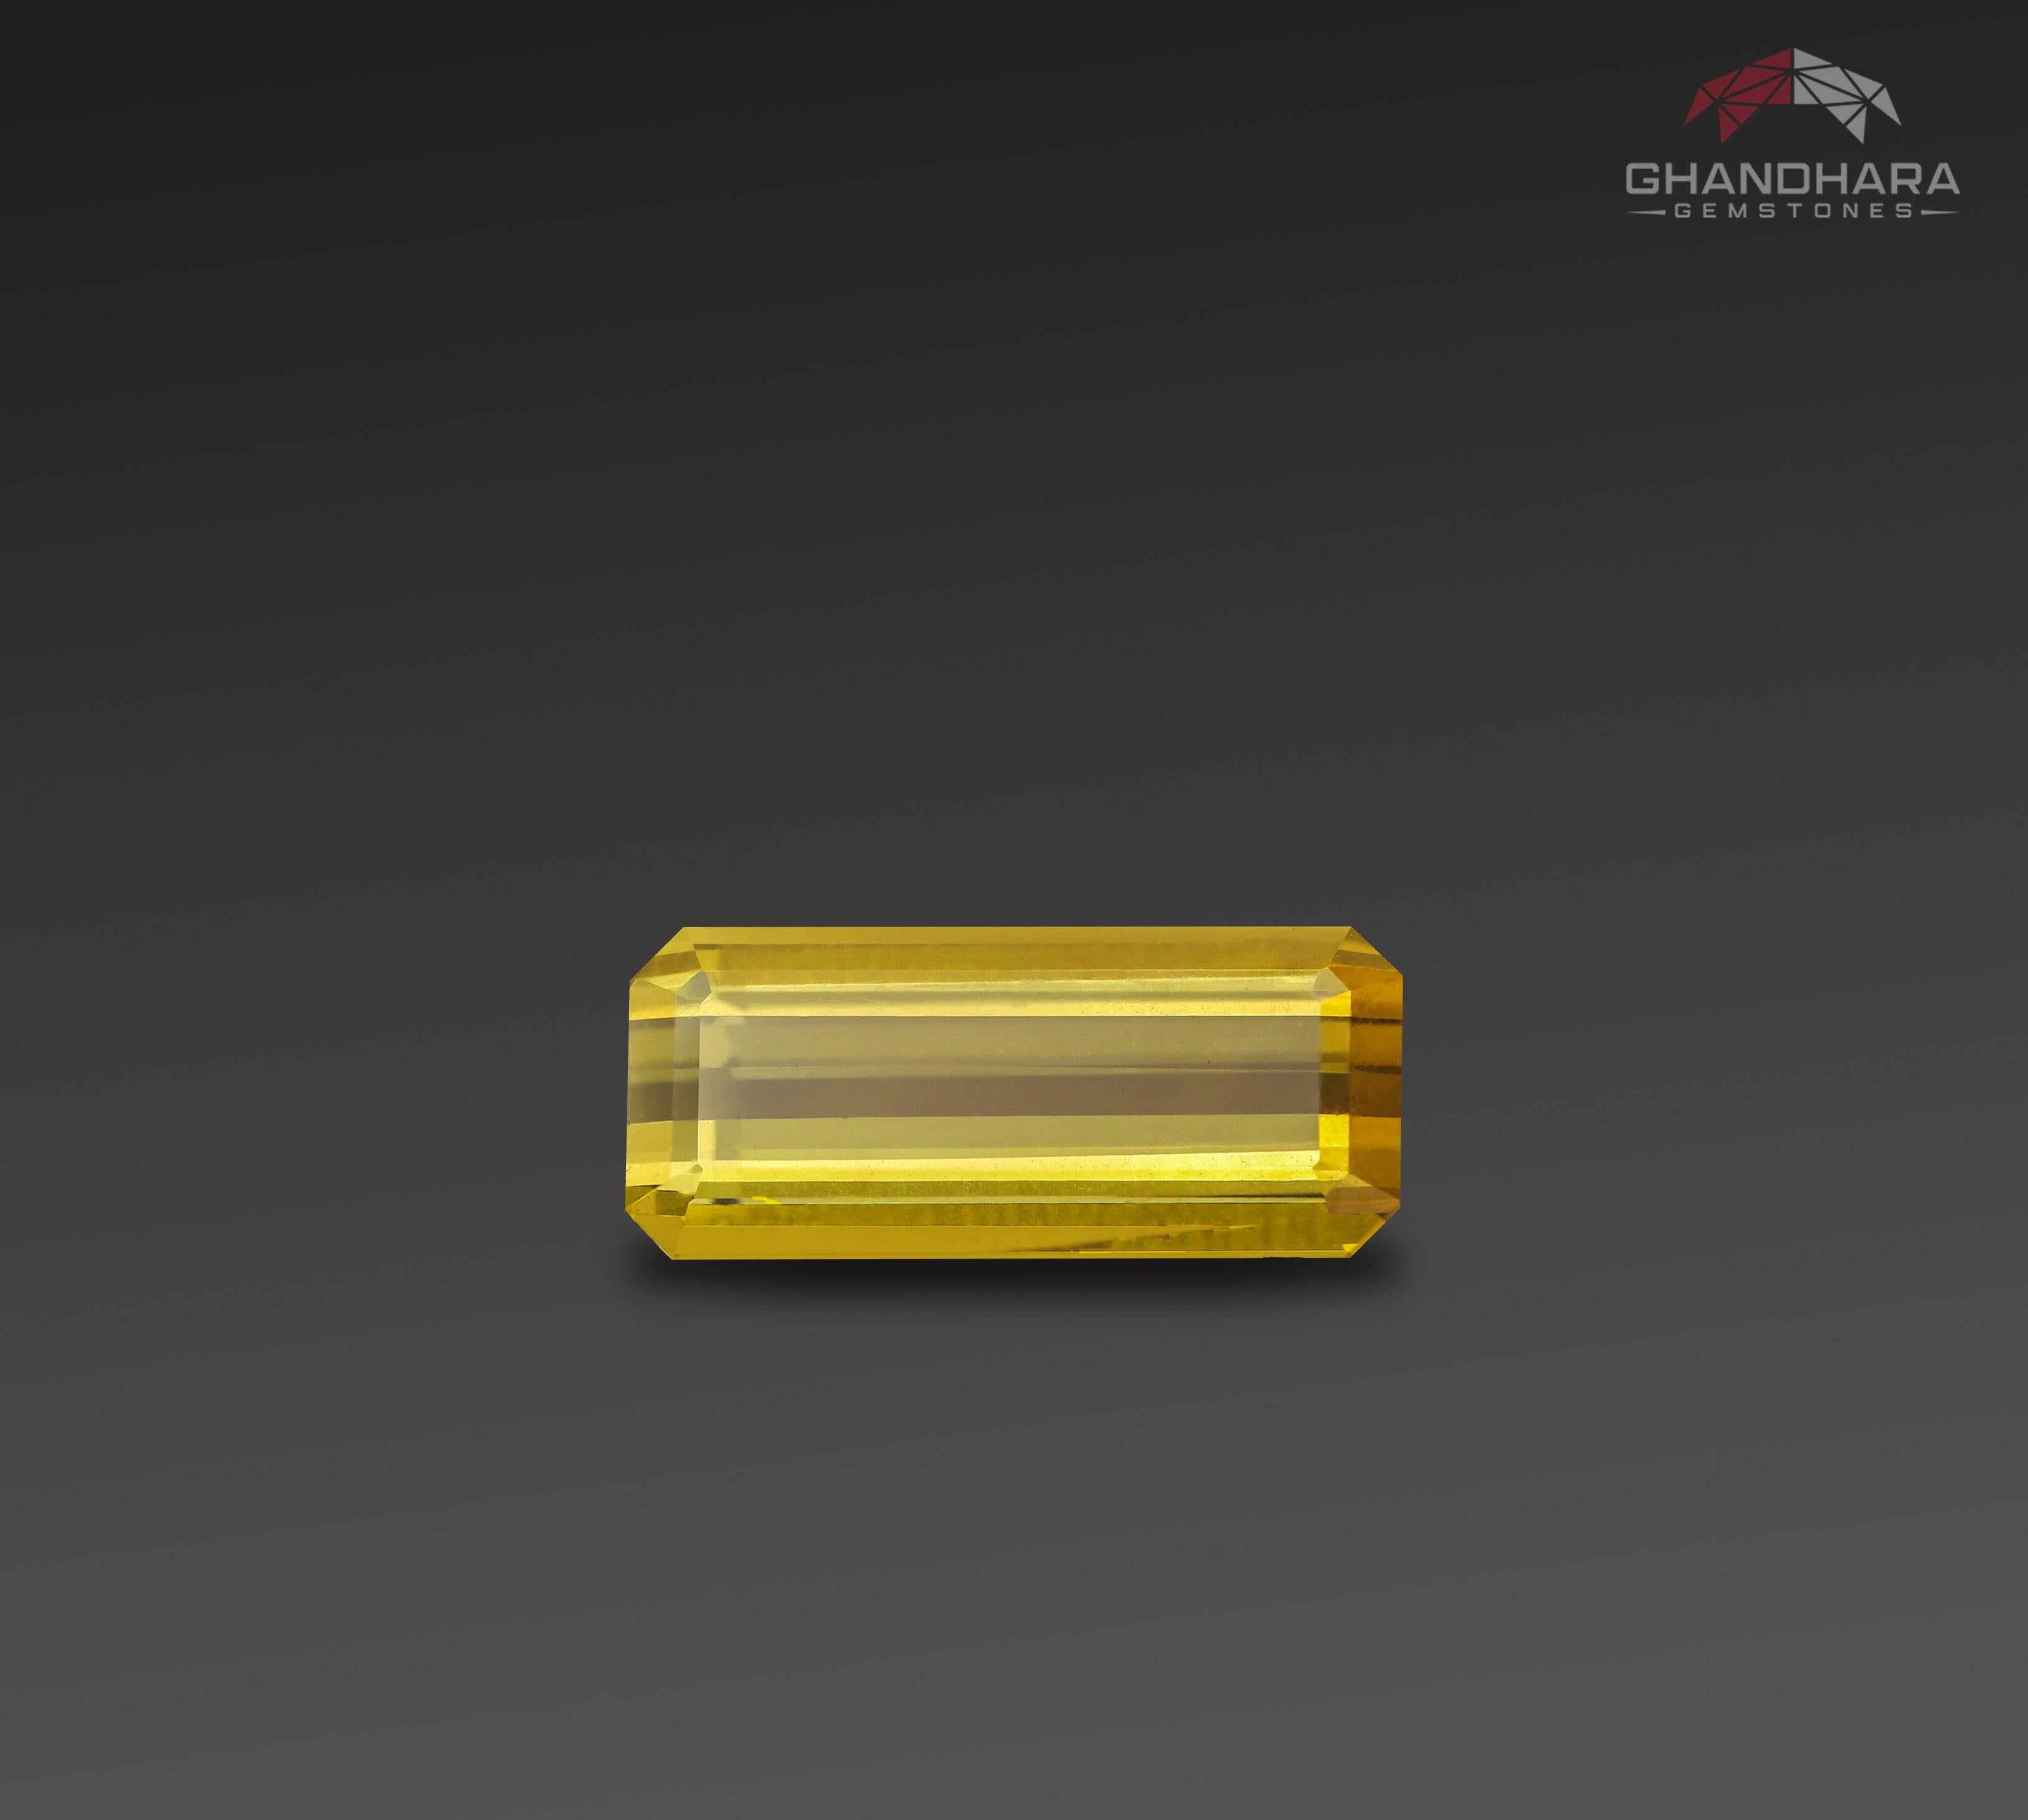 Deep Yellow Canary Tourmaline Gemstone, available for sale at wholesale price, natural high-quality, 5.45 carats Loose certified tourmaline gemstone from Zambia.

Product Information:
GEMSTONE TYPE	Deep Yellow Canary Tourmaline Gemstone
WEIGHT	5.45